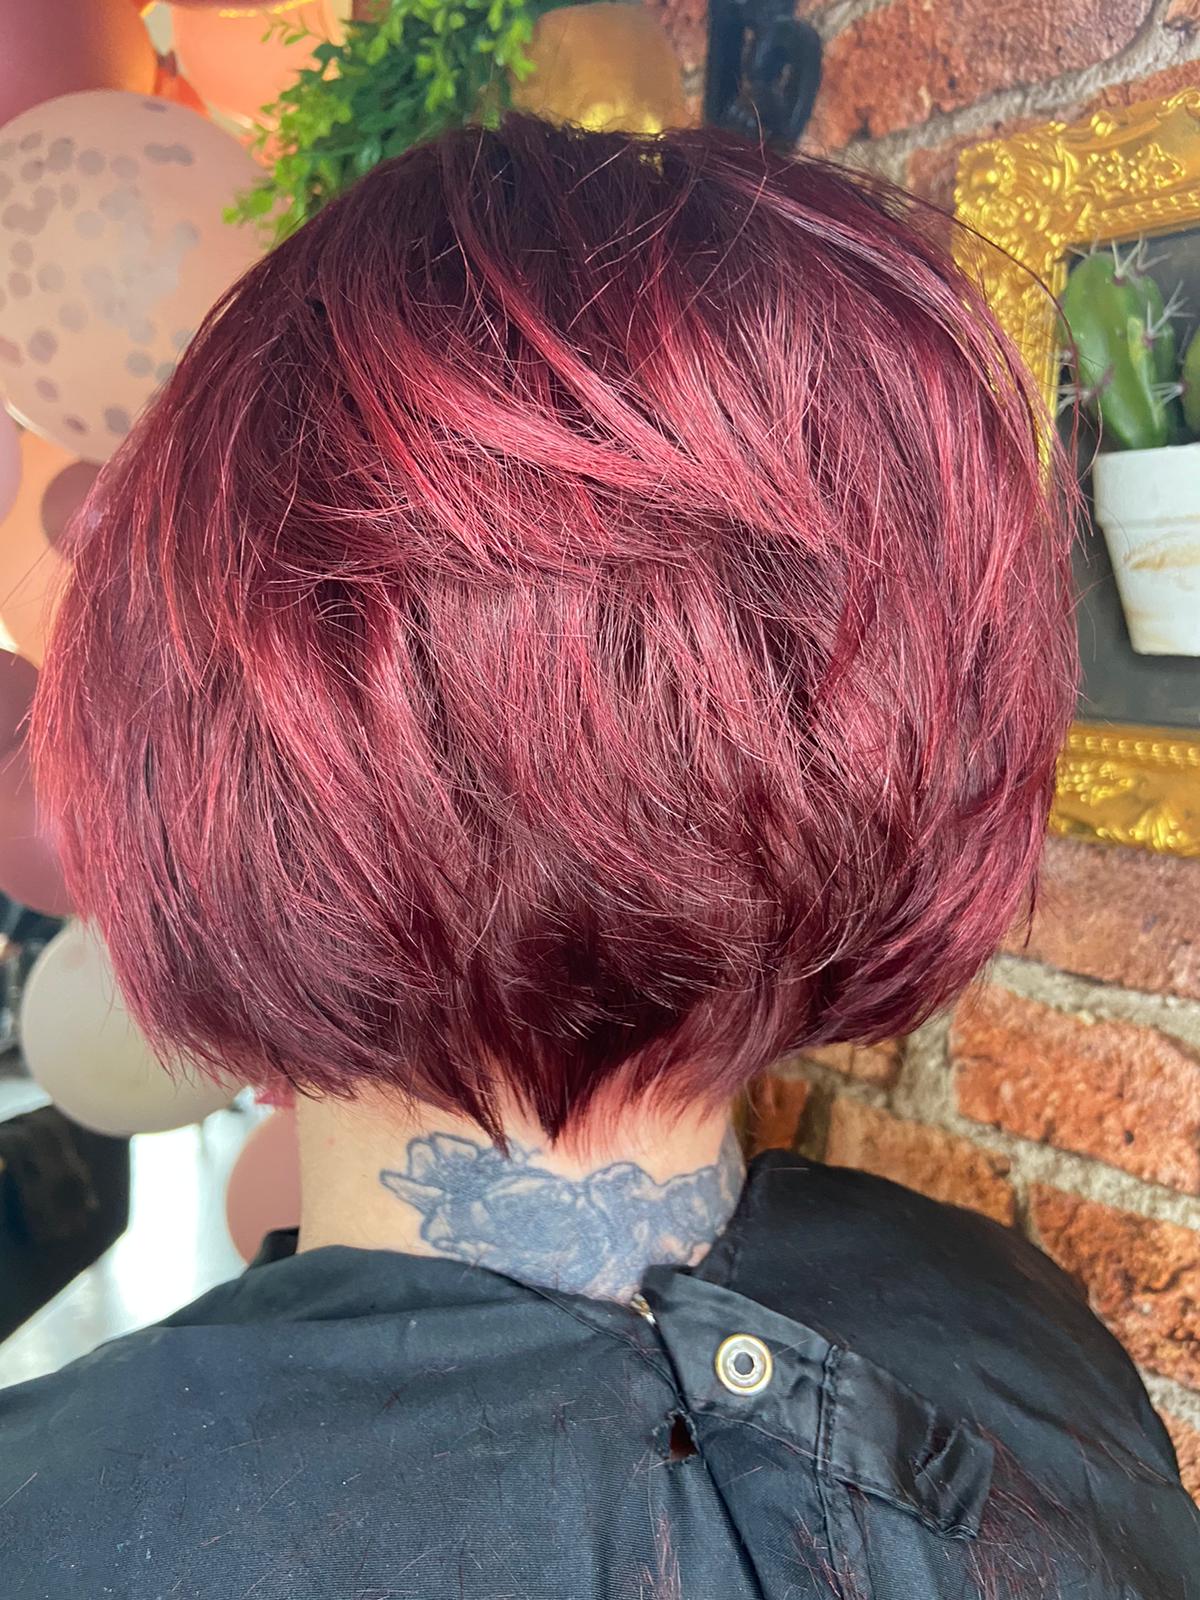 Red, Red, Red for our salon owner